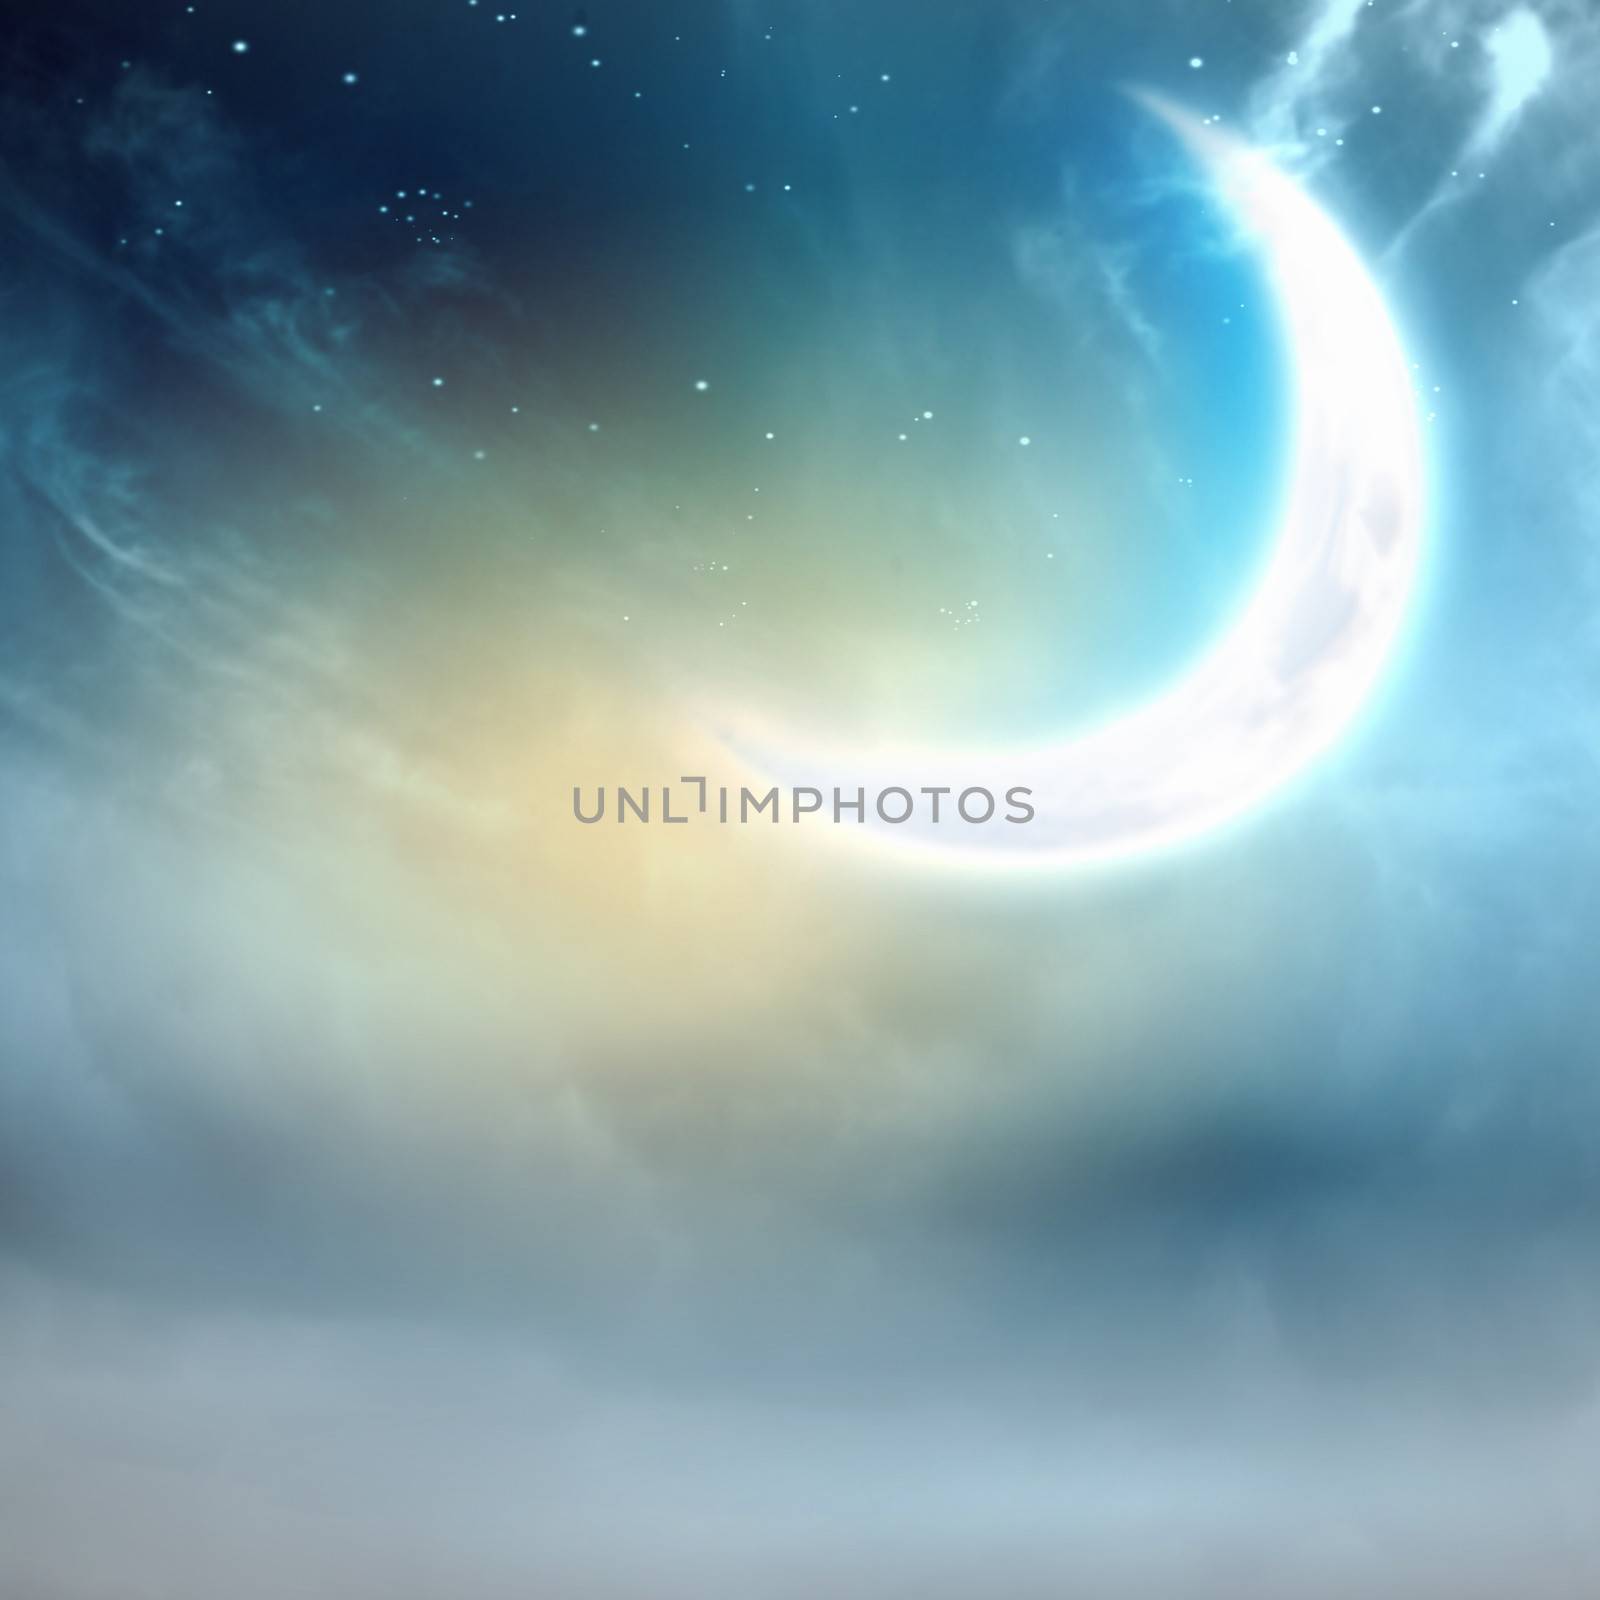 Background image of night sky with moon